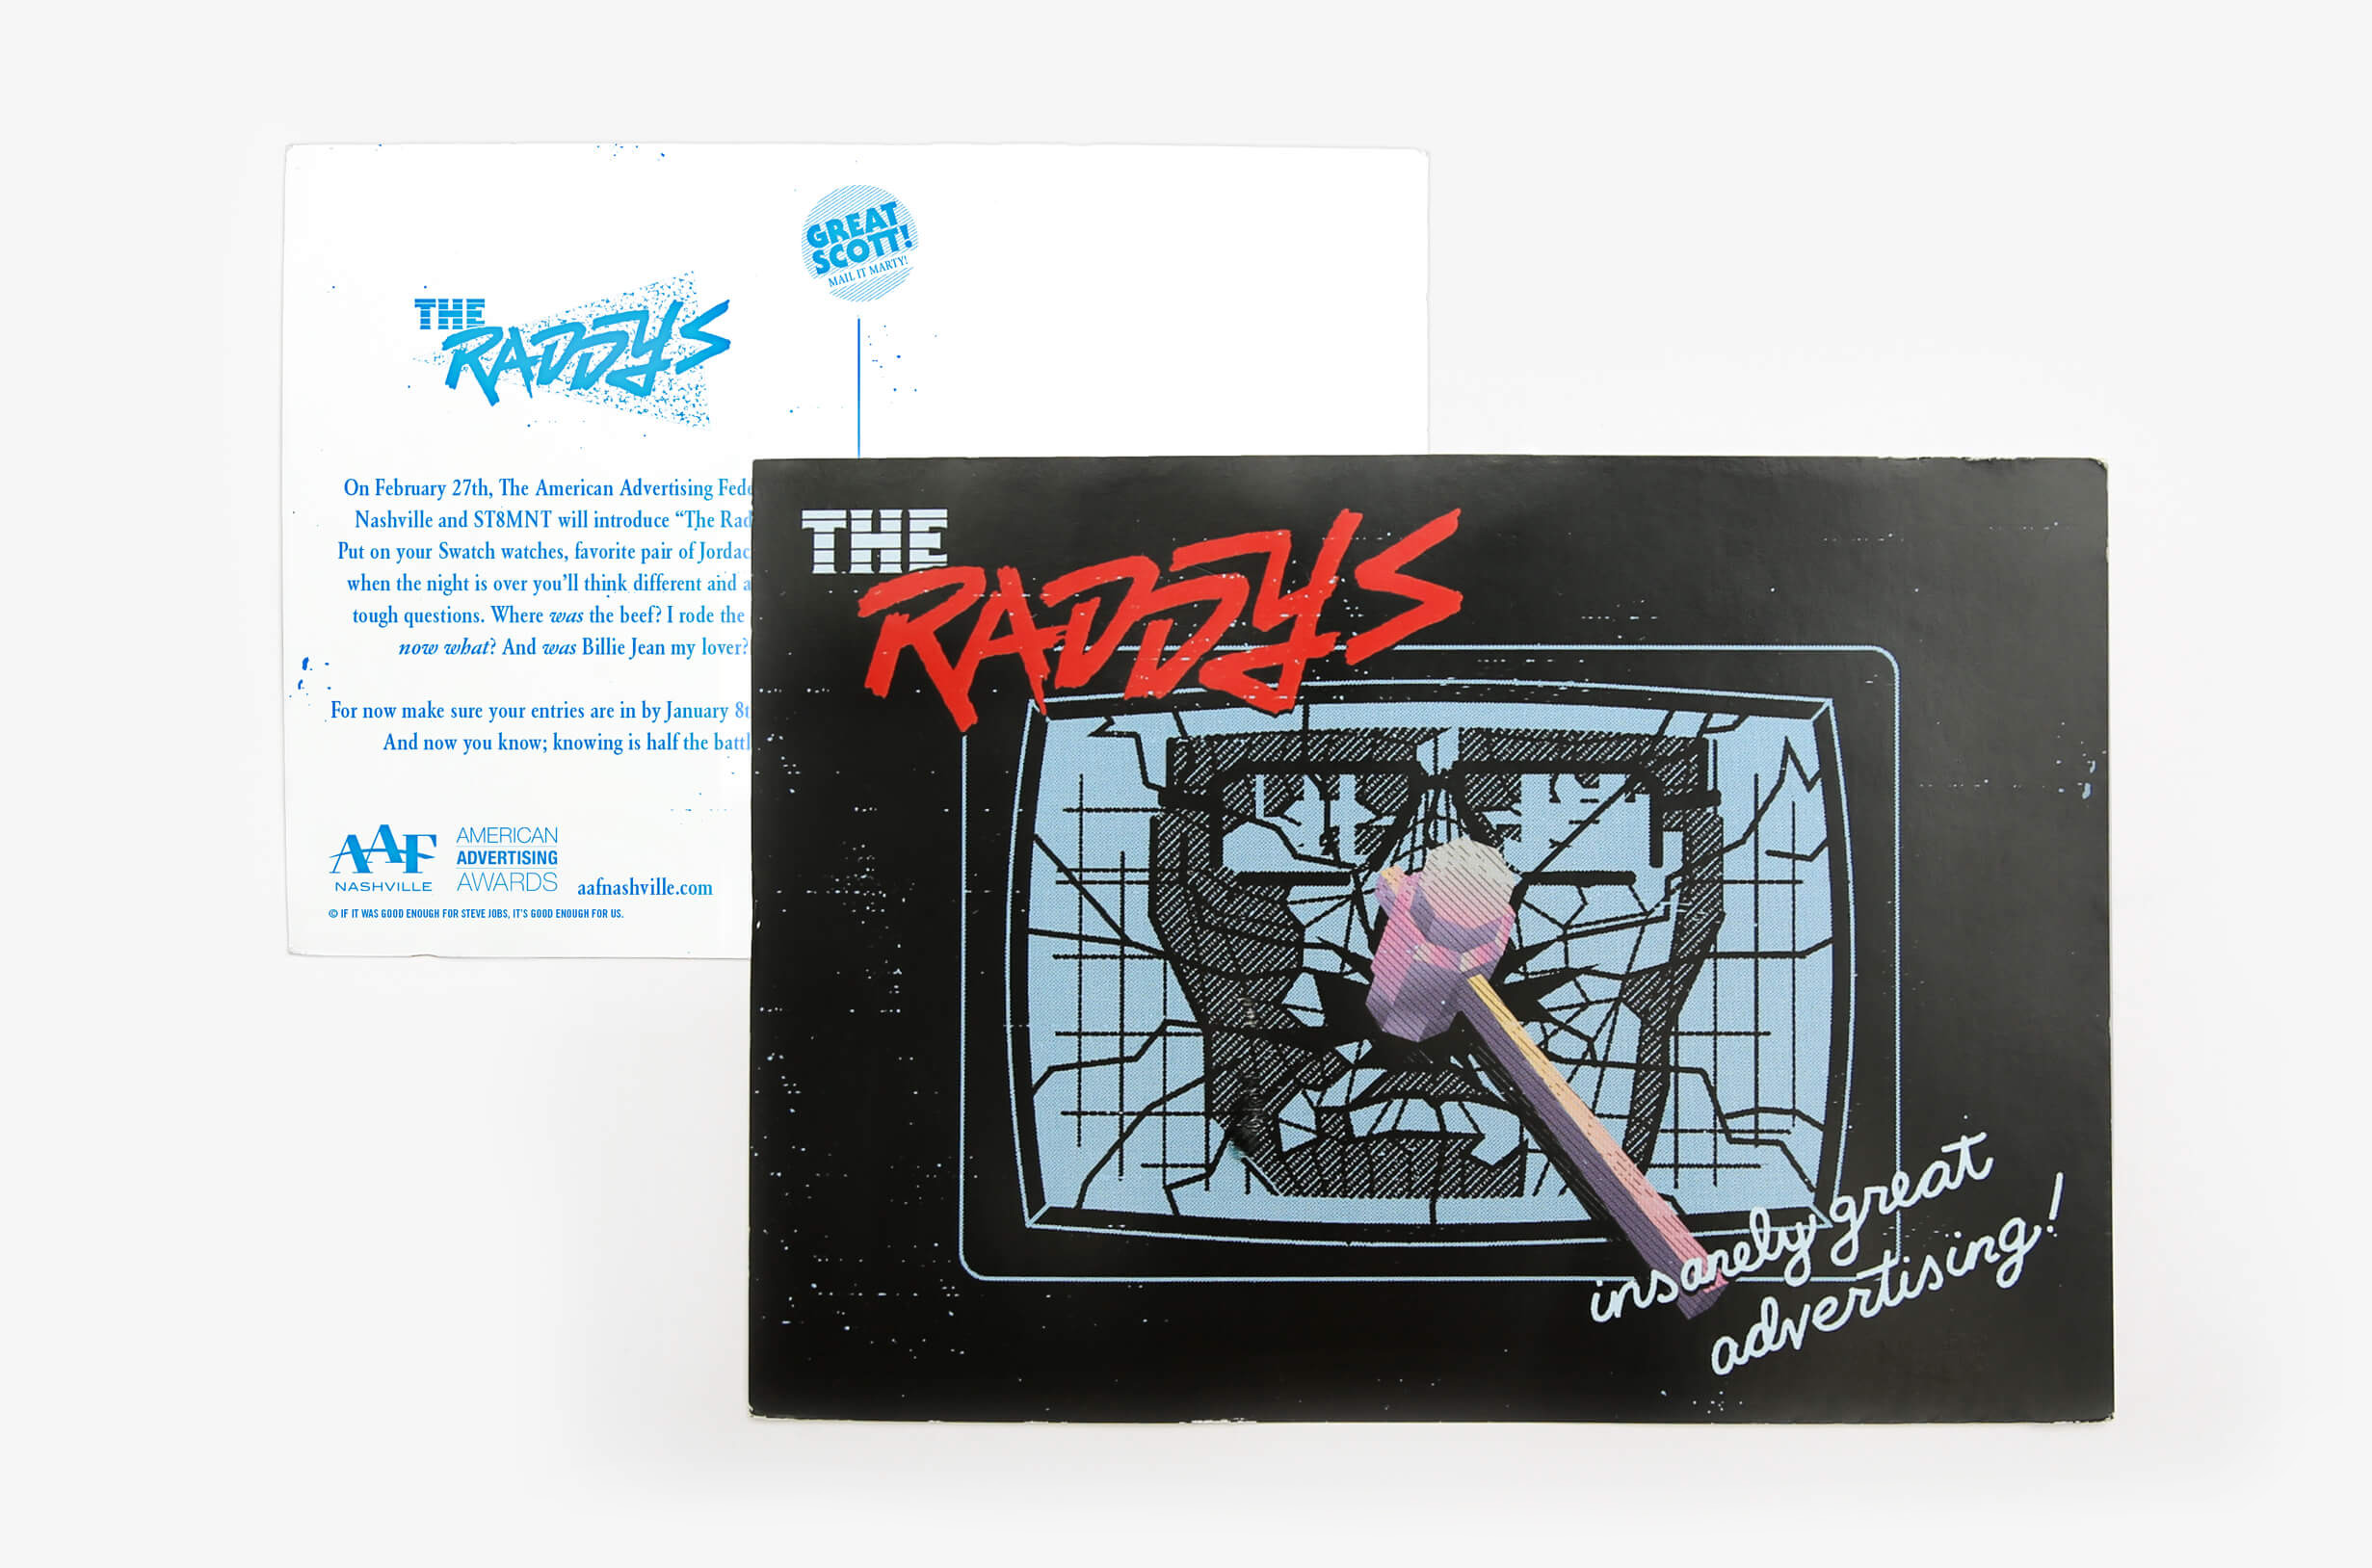 Event theme branded postcard for The Raddys including 80s advertising design elements for the 51st Nashville Addy Awards in Tennessee